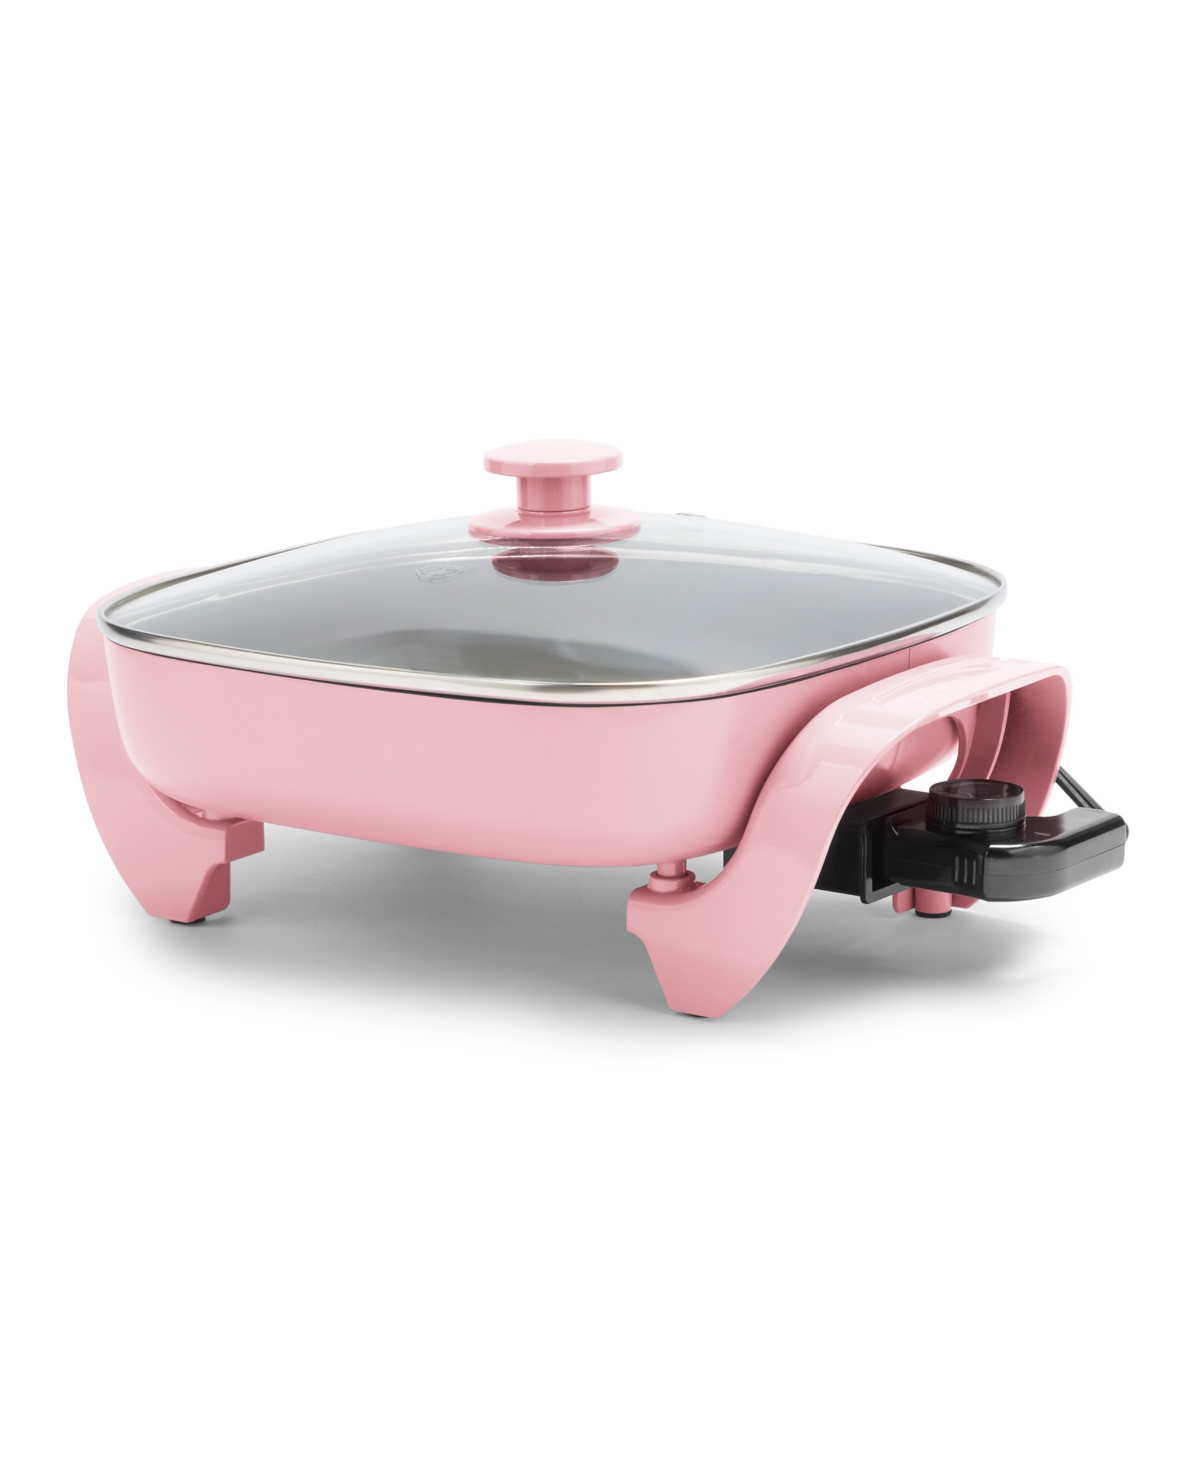 Greenlife Healthy Power 5-in-1 Electric Skillet In Pink